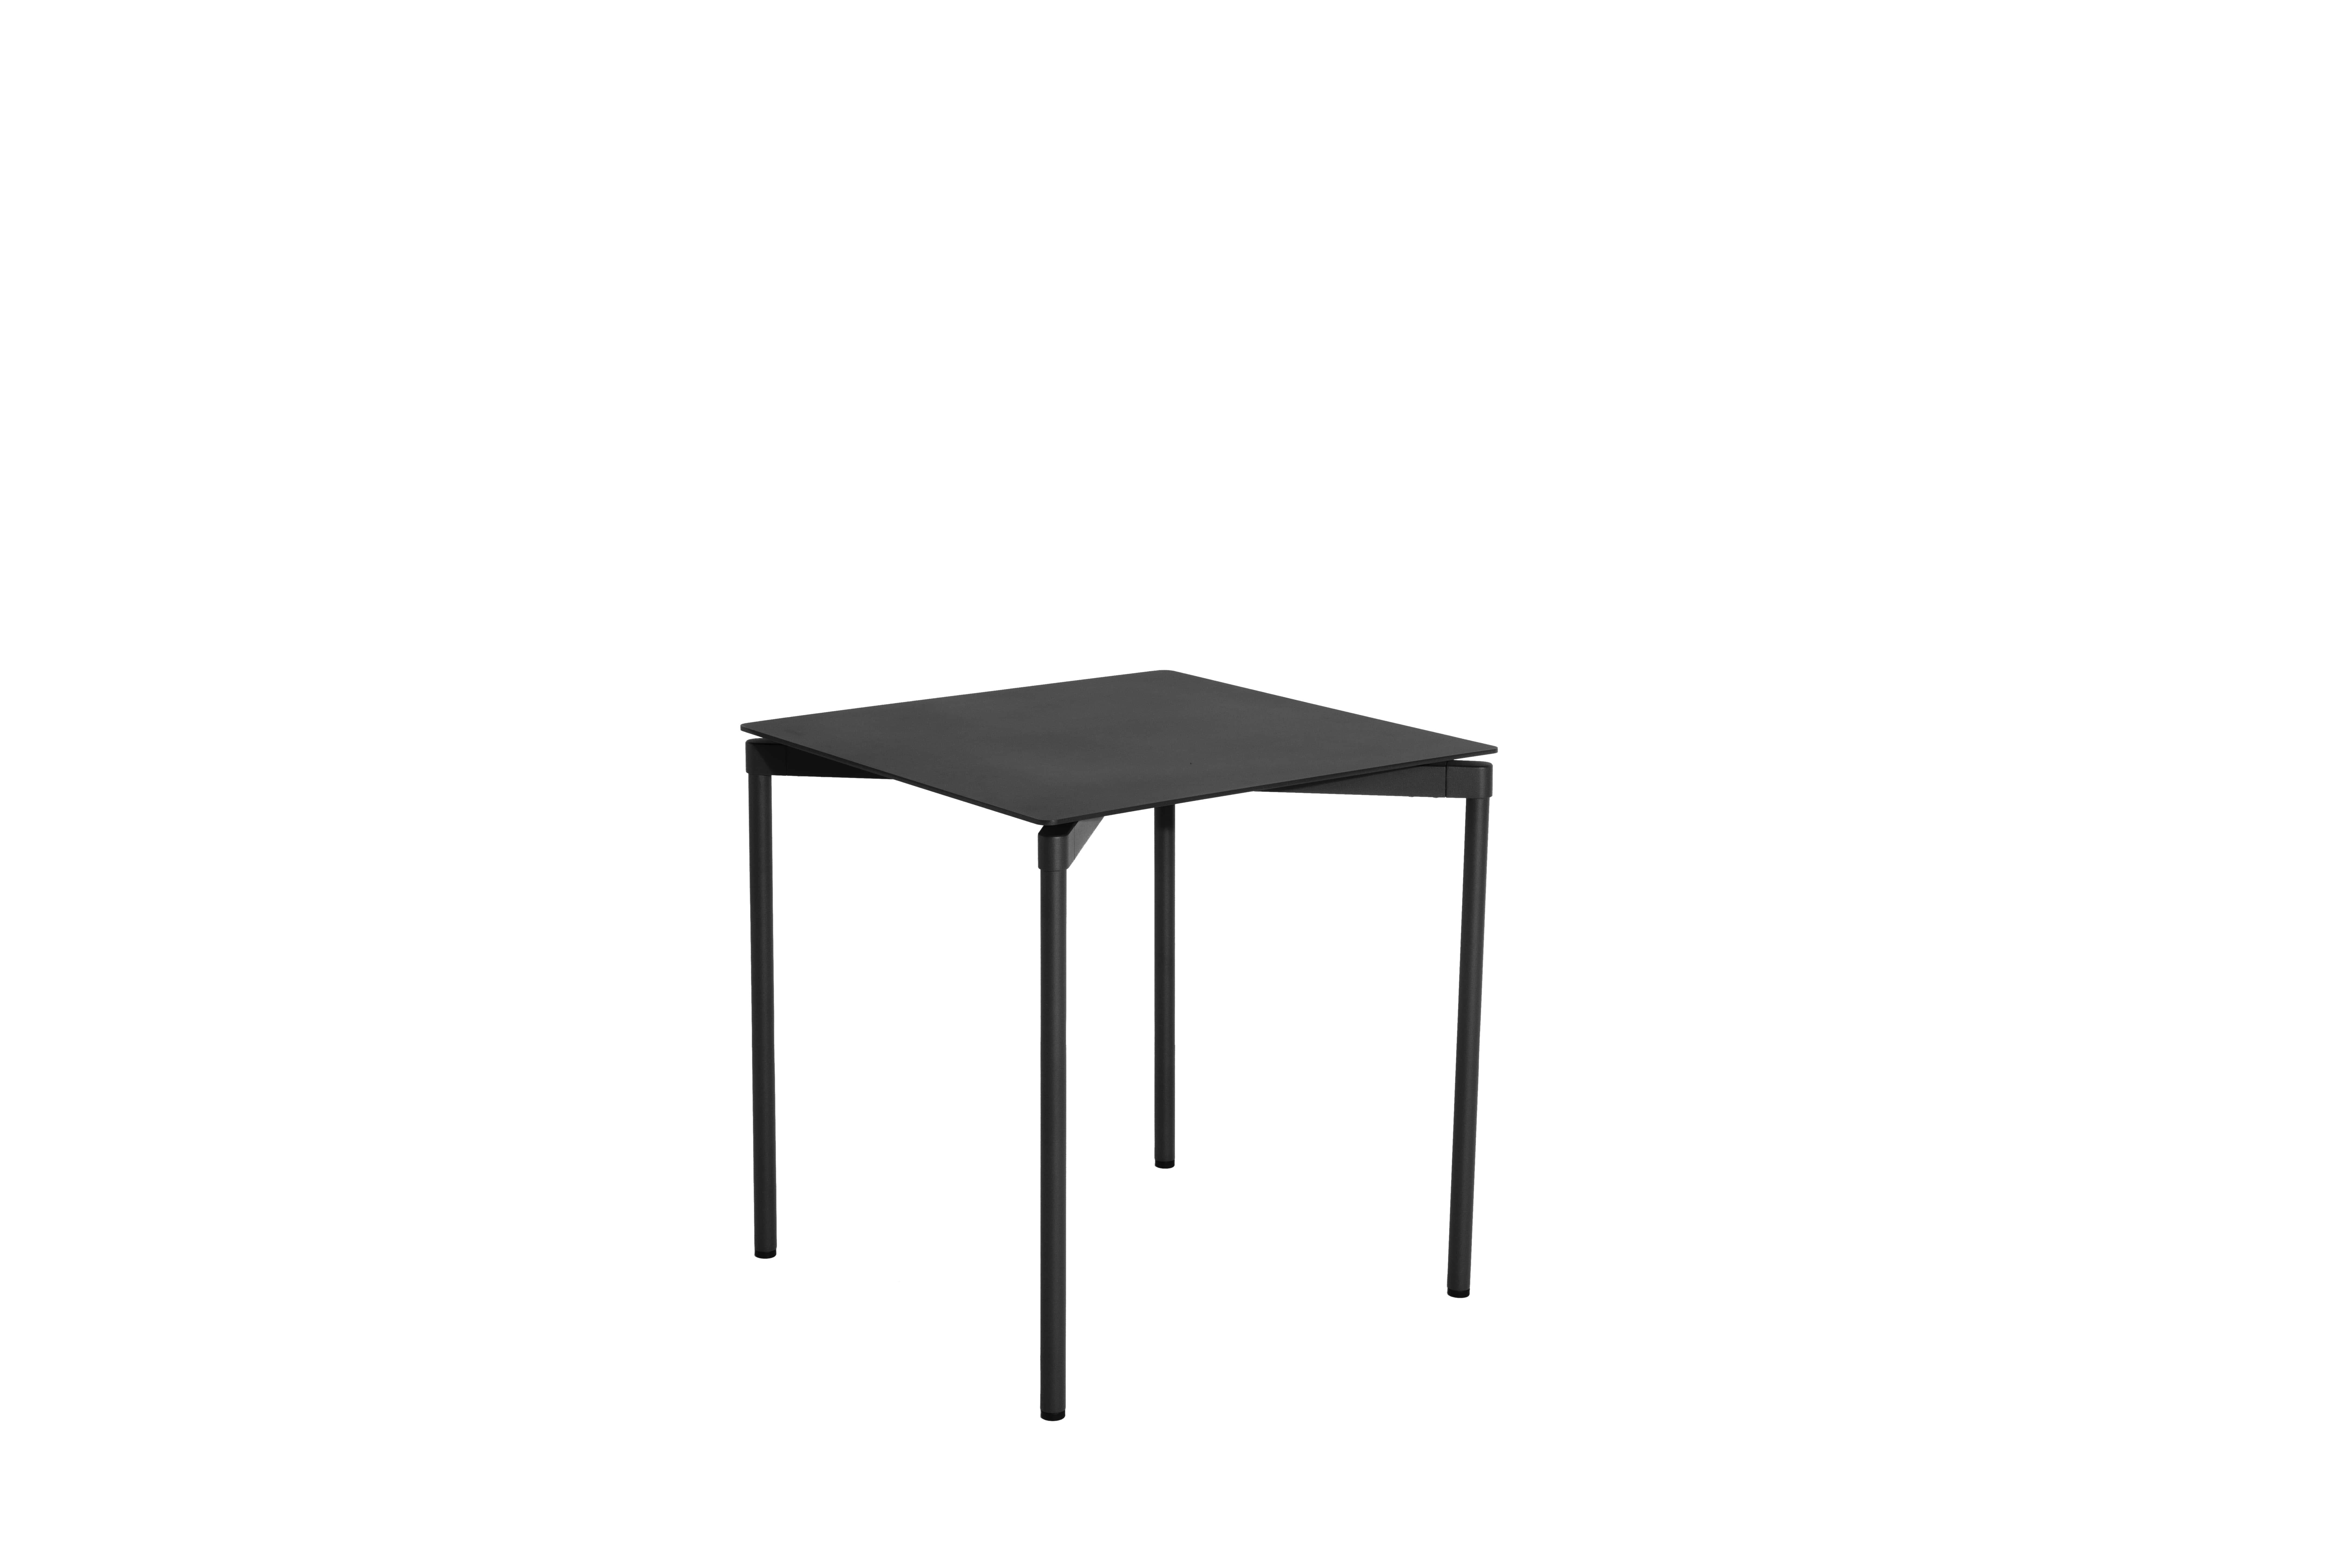 Chinese Petite Friture Fromme Square Table in Black Aluminium by Tom Chung For Sale